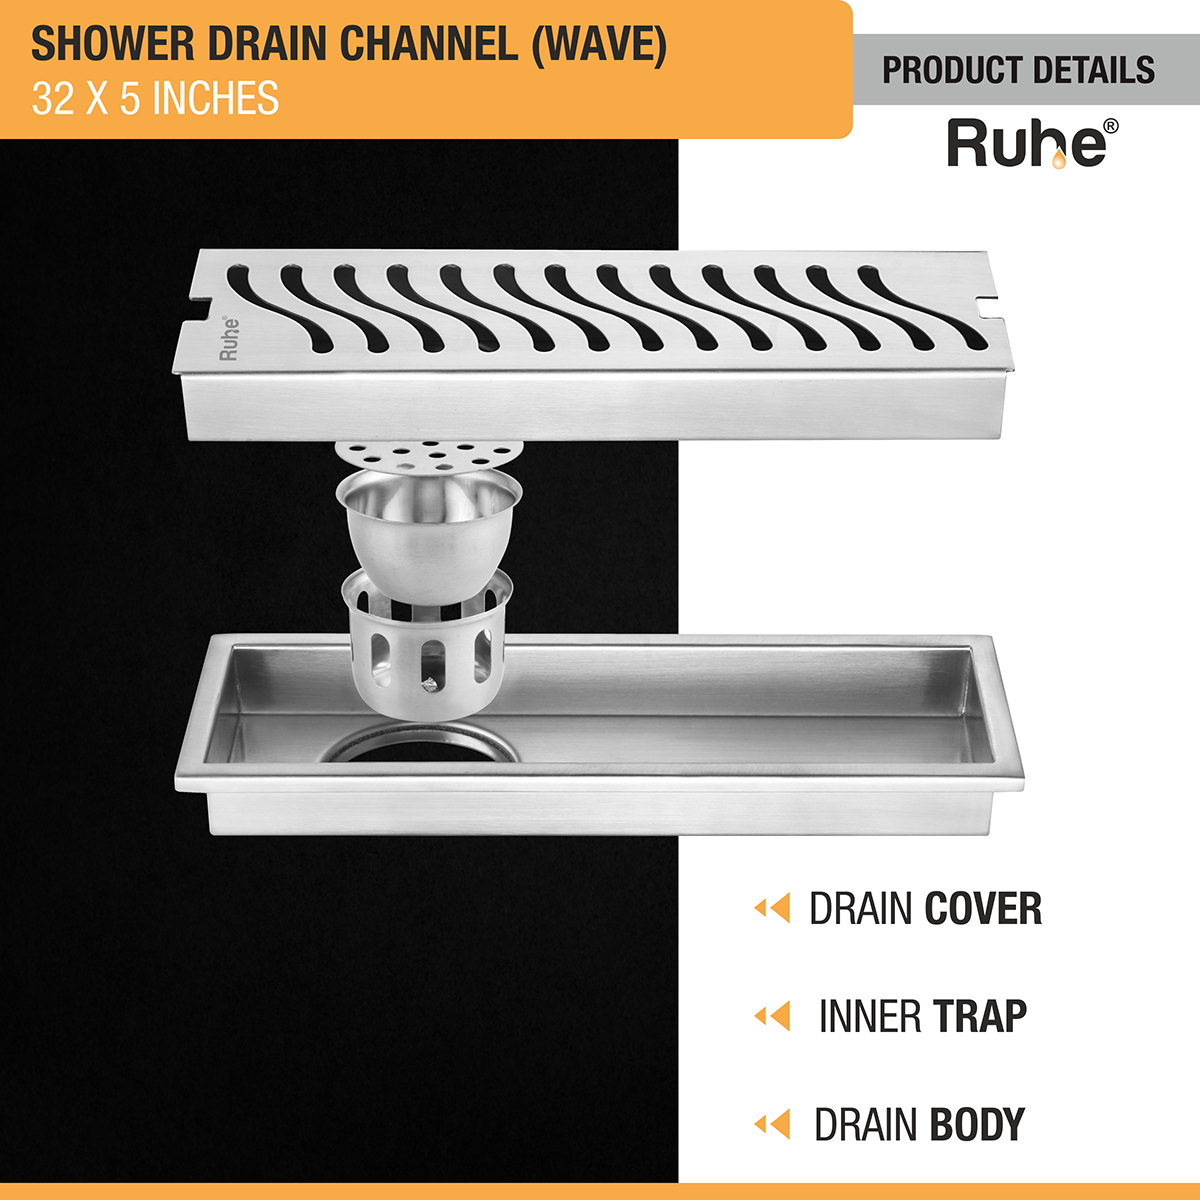 Wave Shower Drain Channel (32 X 5 Inches) with Cockroach Trap (304 Grade) product details